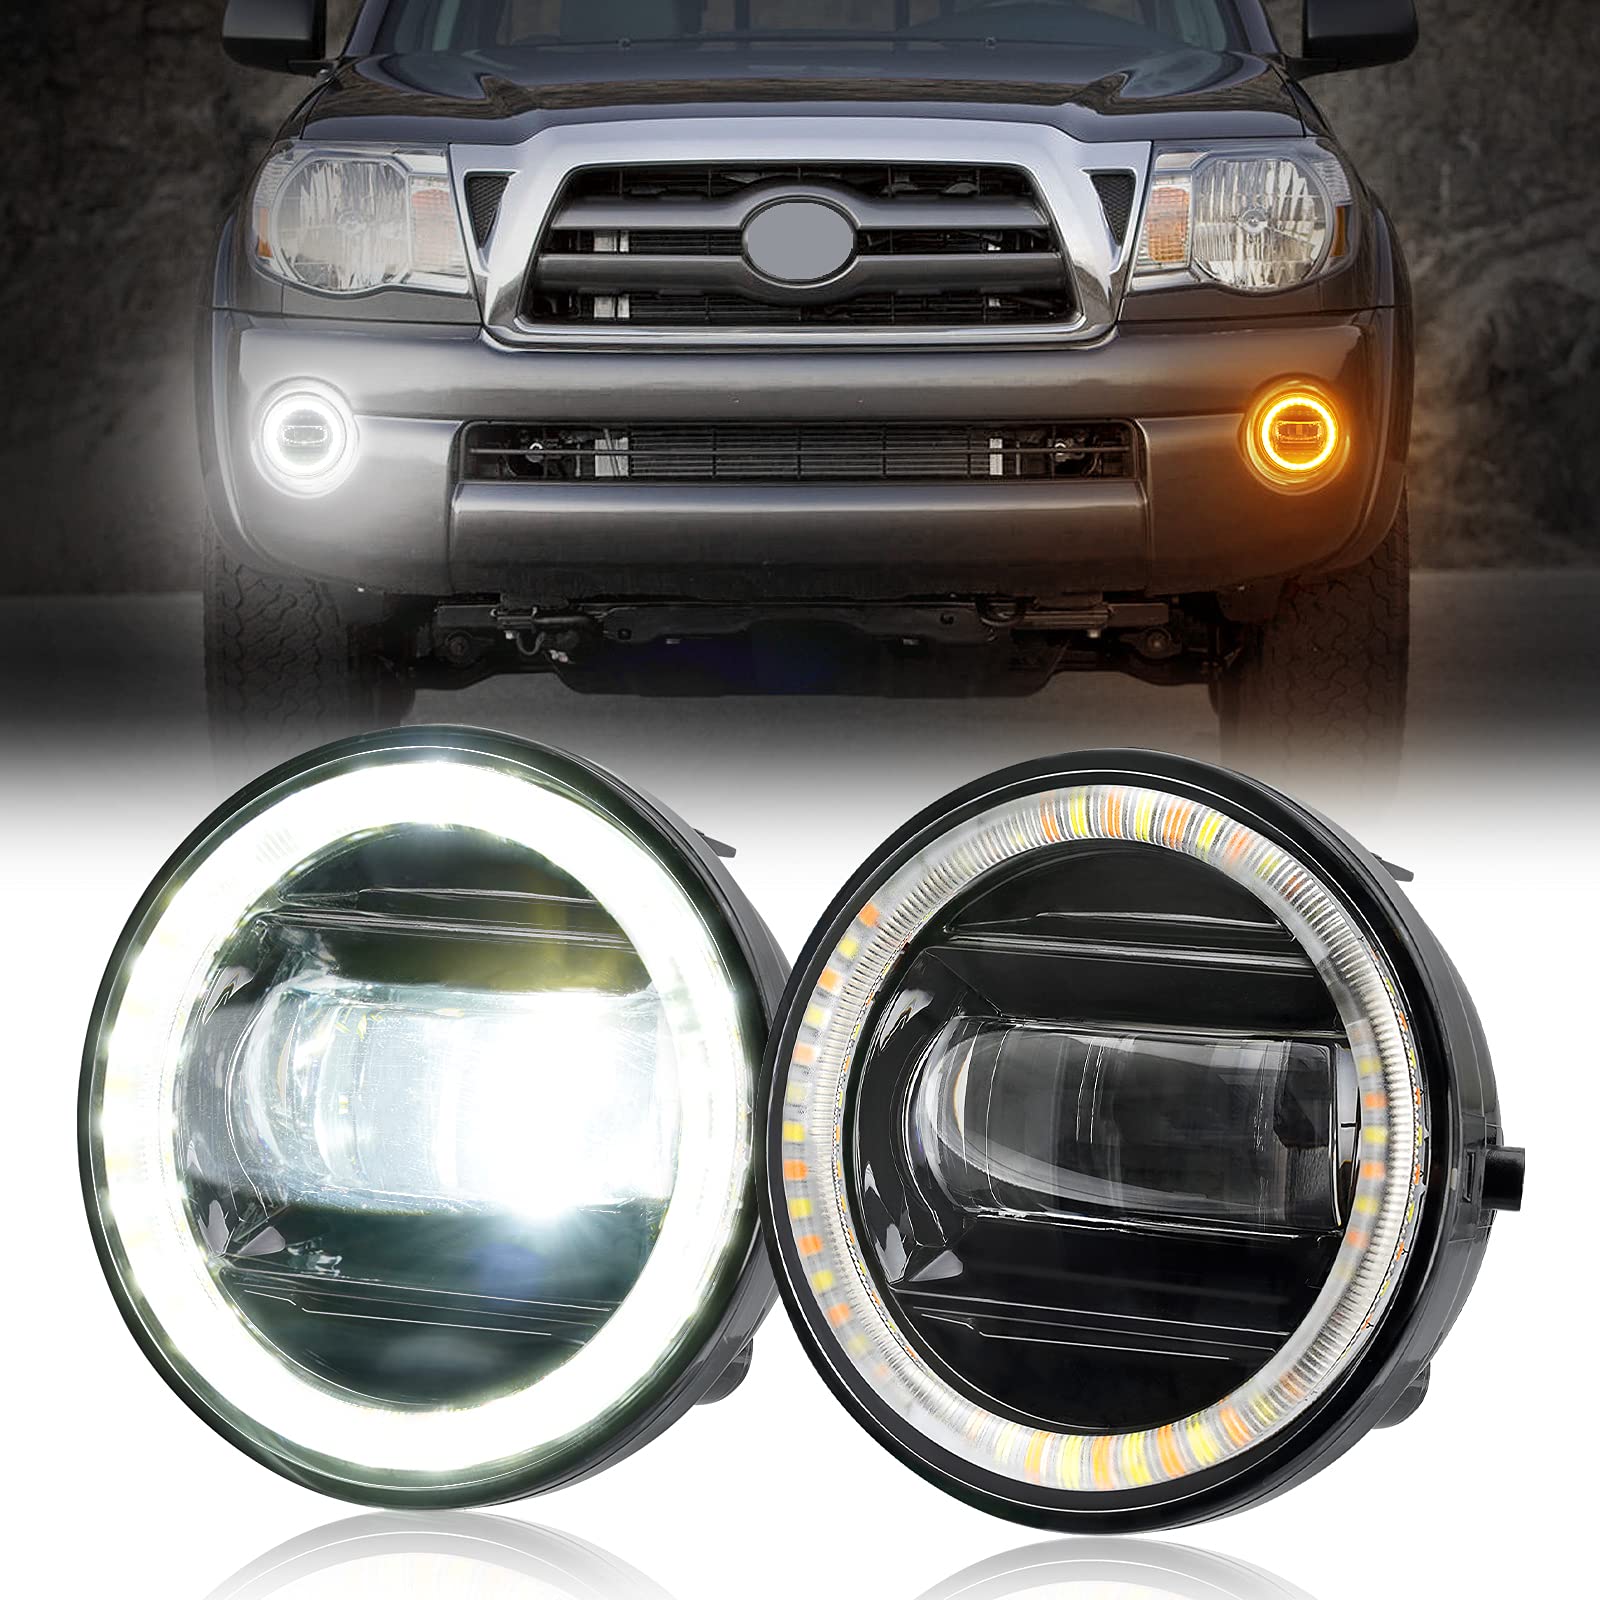 Fog Lights on Cars: Enhancing Safety and Visibility in Adverse Weather Conditions插图